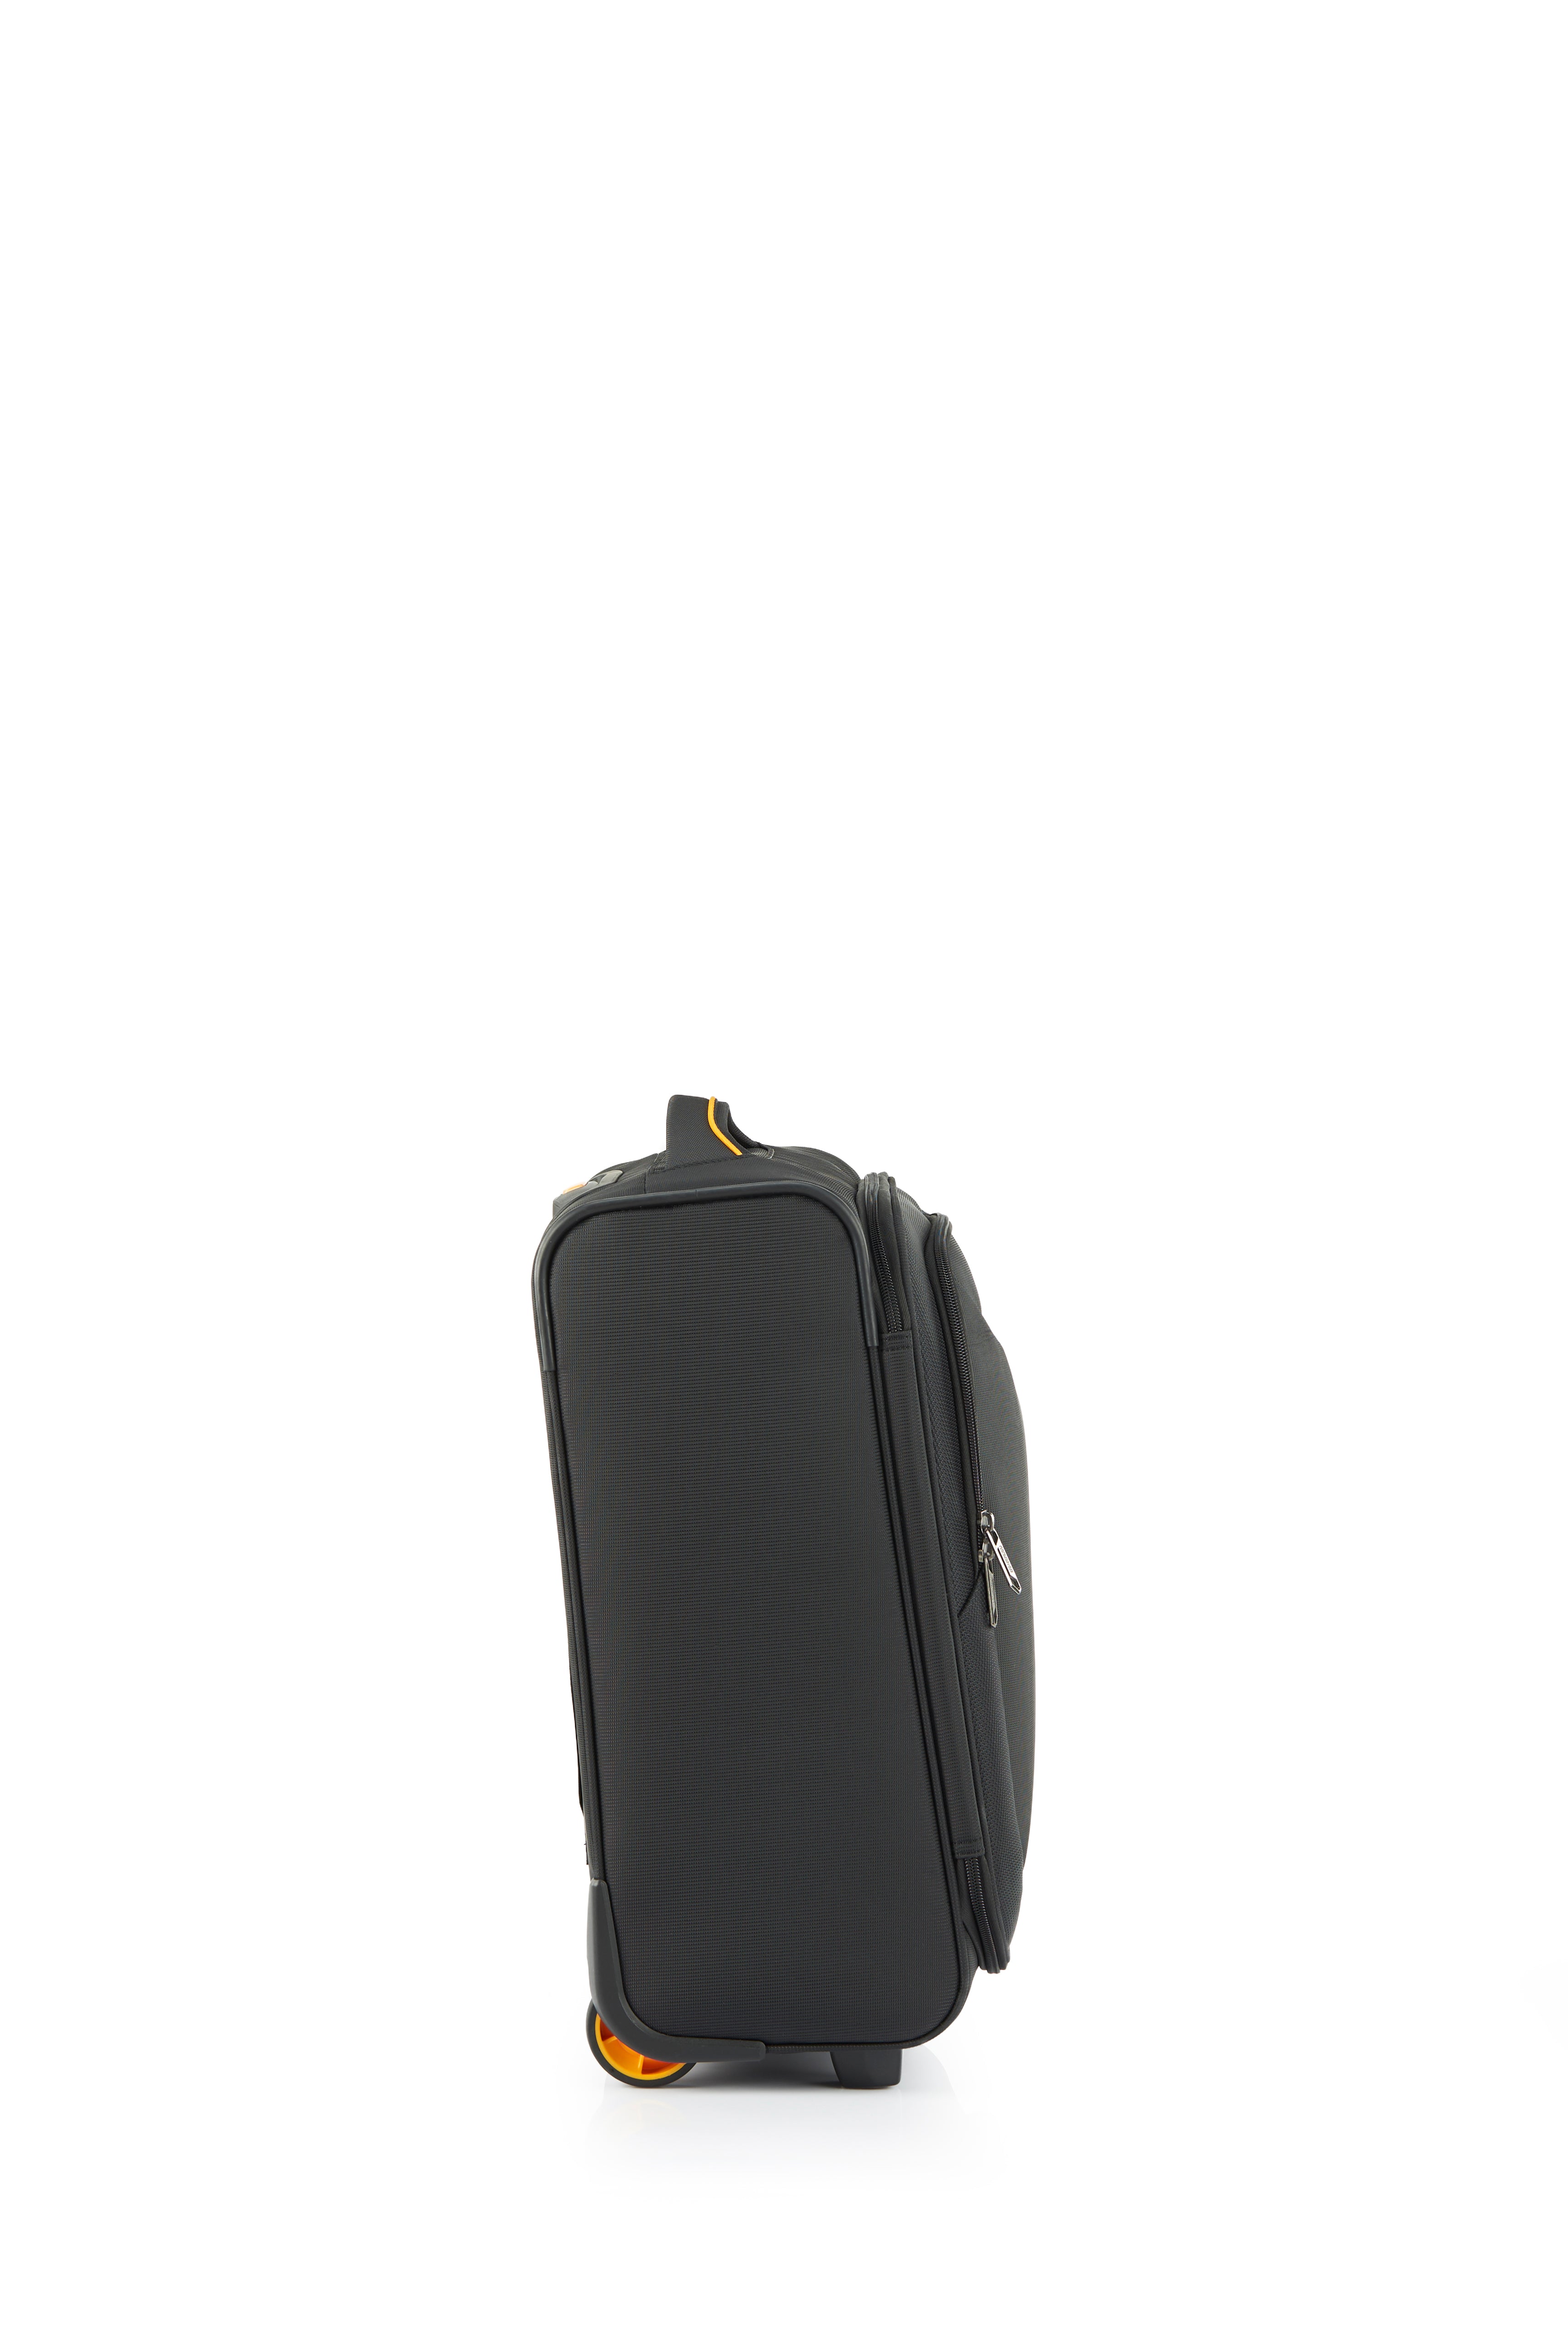 American Tourister - Applite ECO 50cm Small Suitcase - Black/Must-3